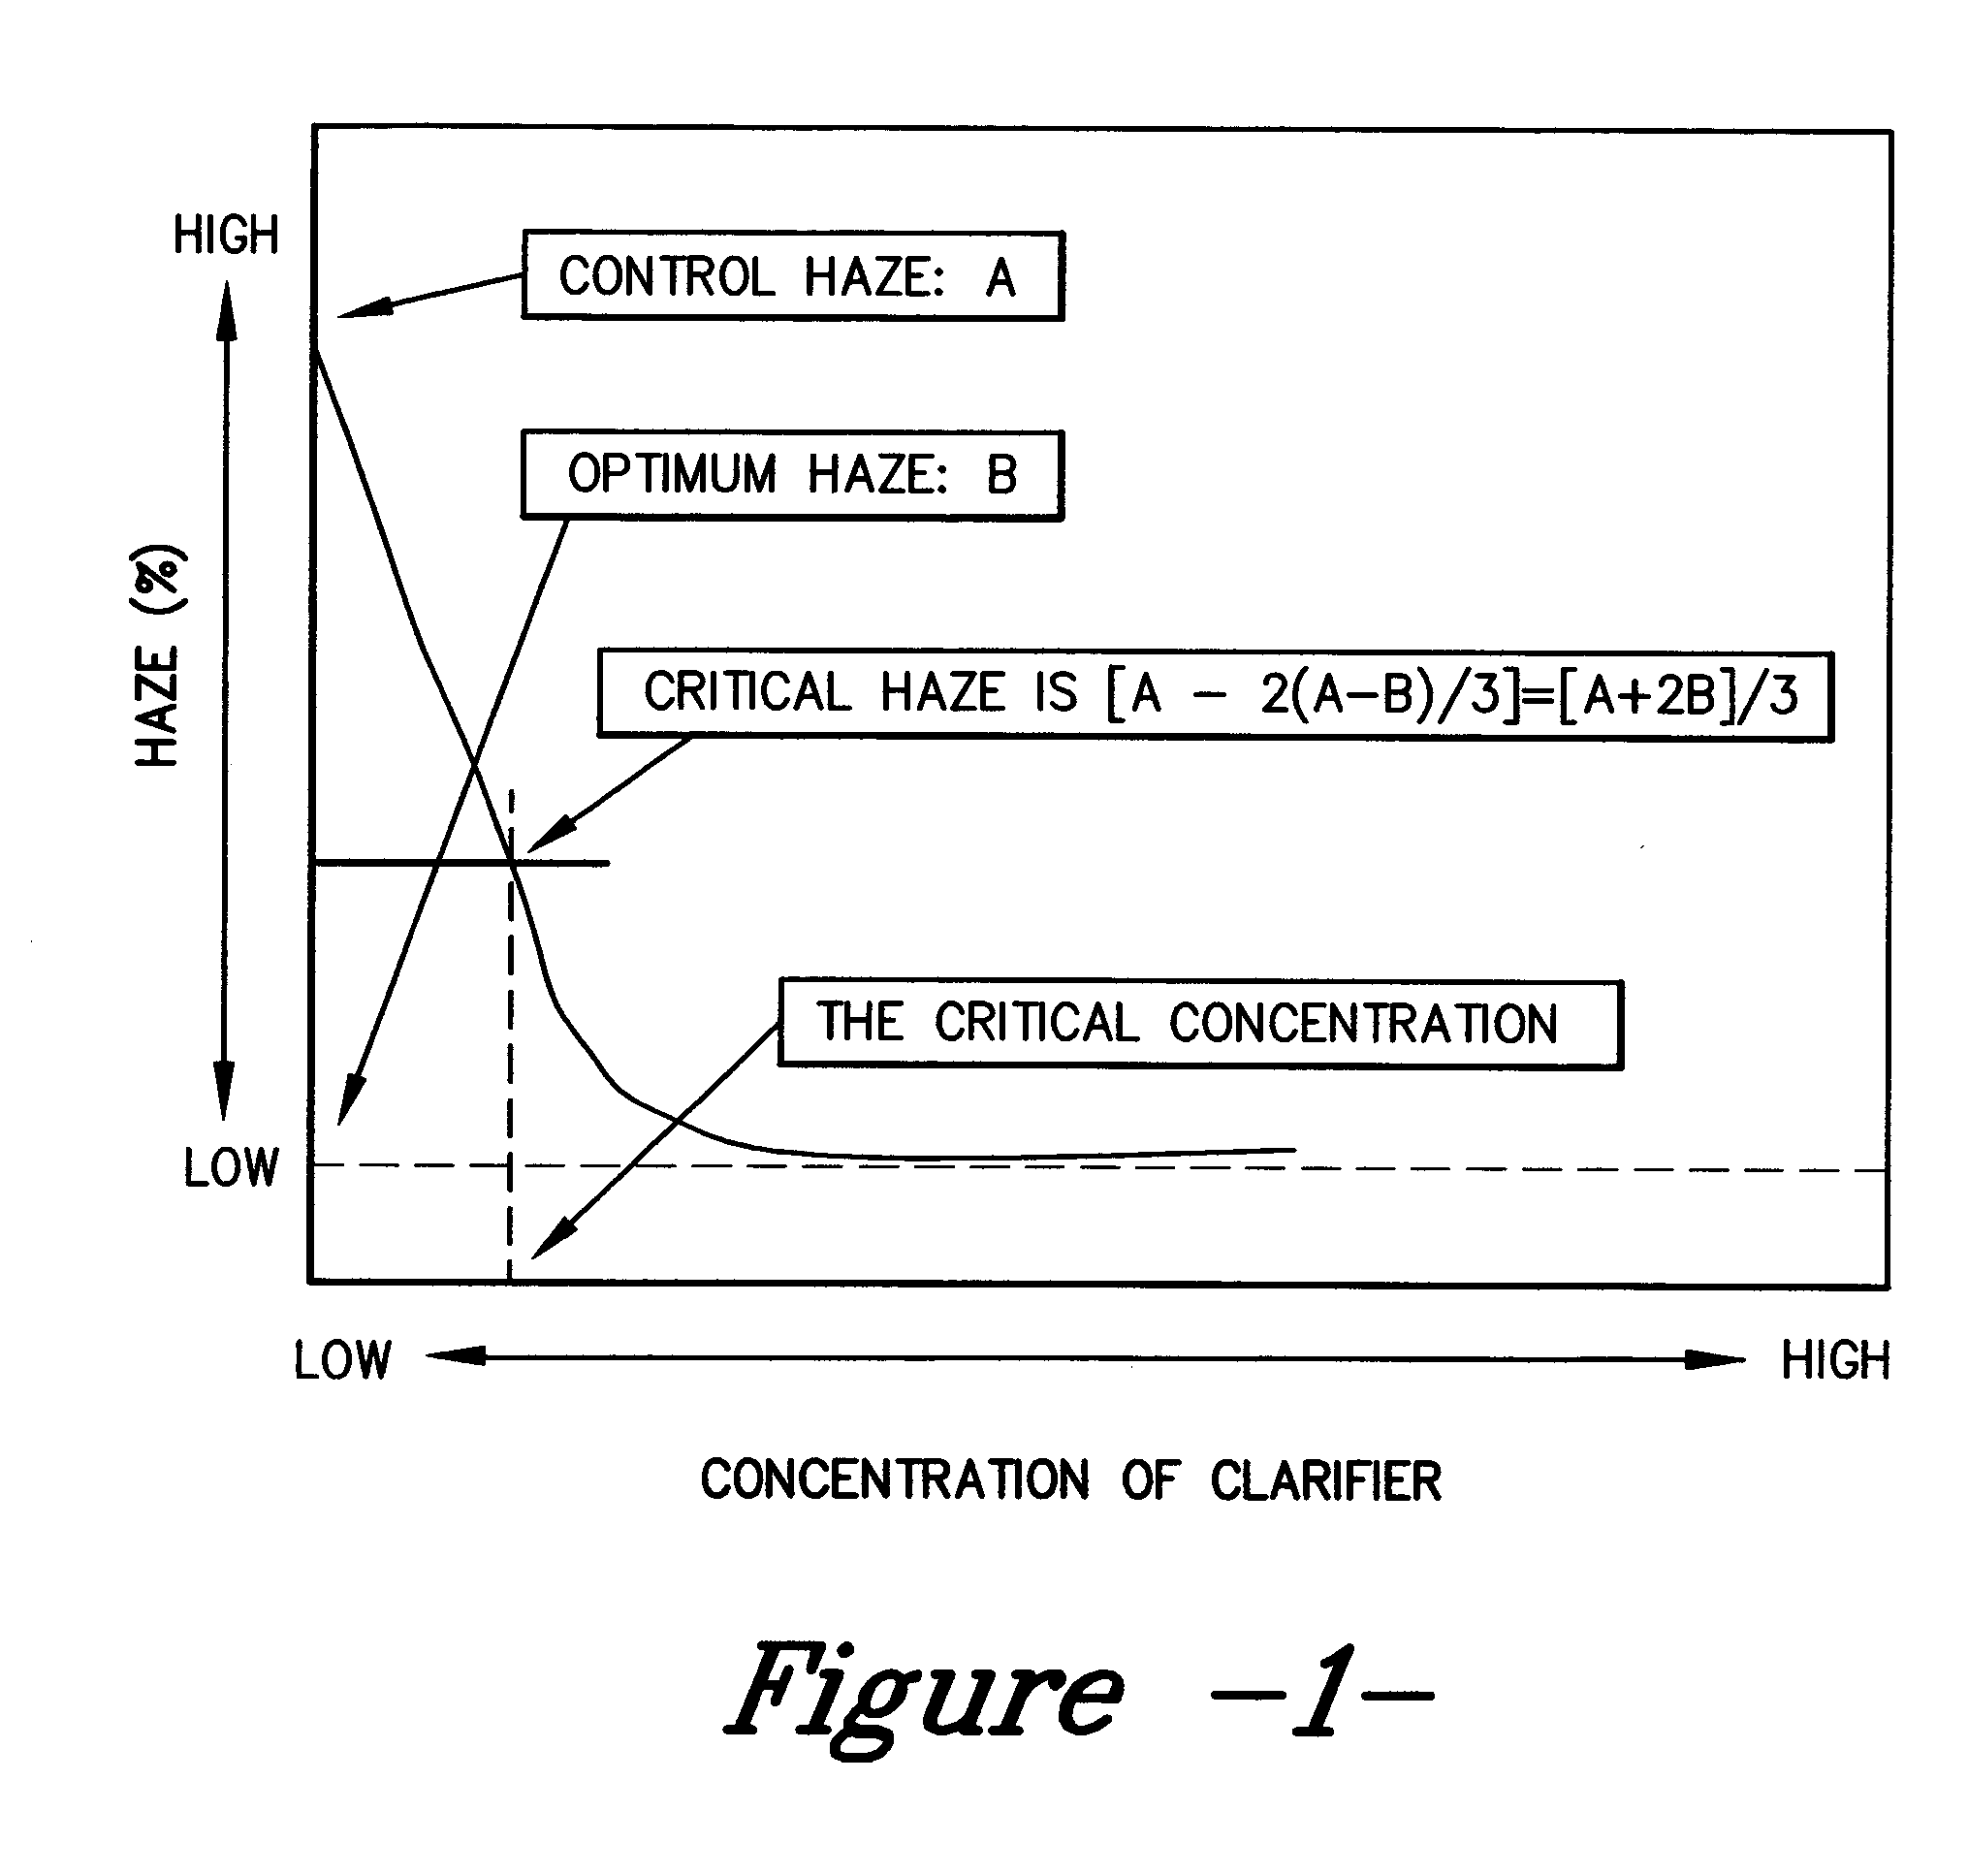 Co-additive compositions and methods for applying co-additive compositions into nucleated polymer compounds